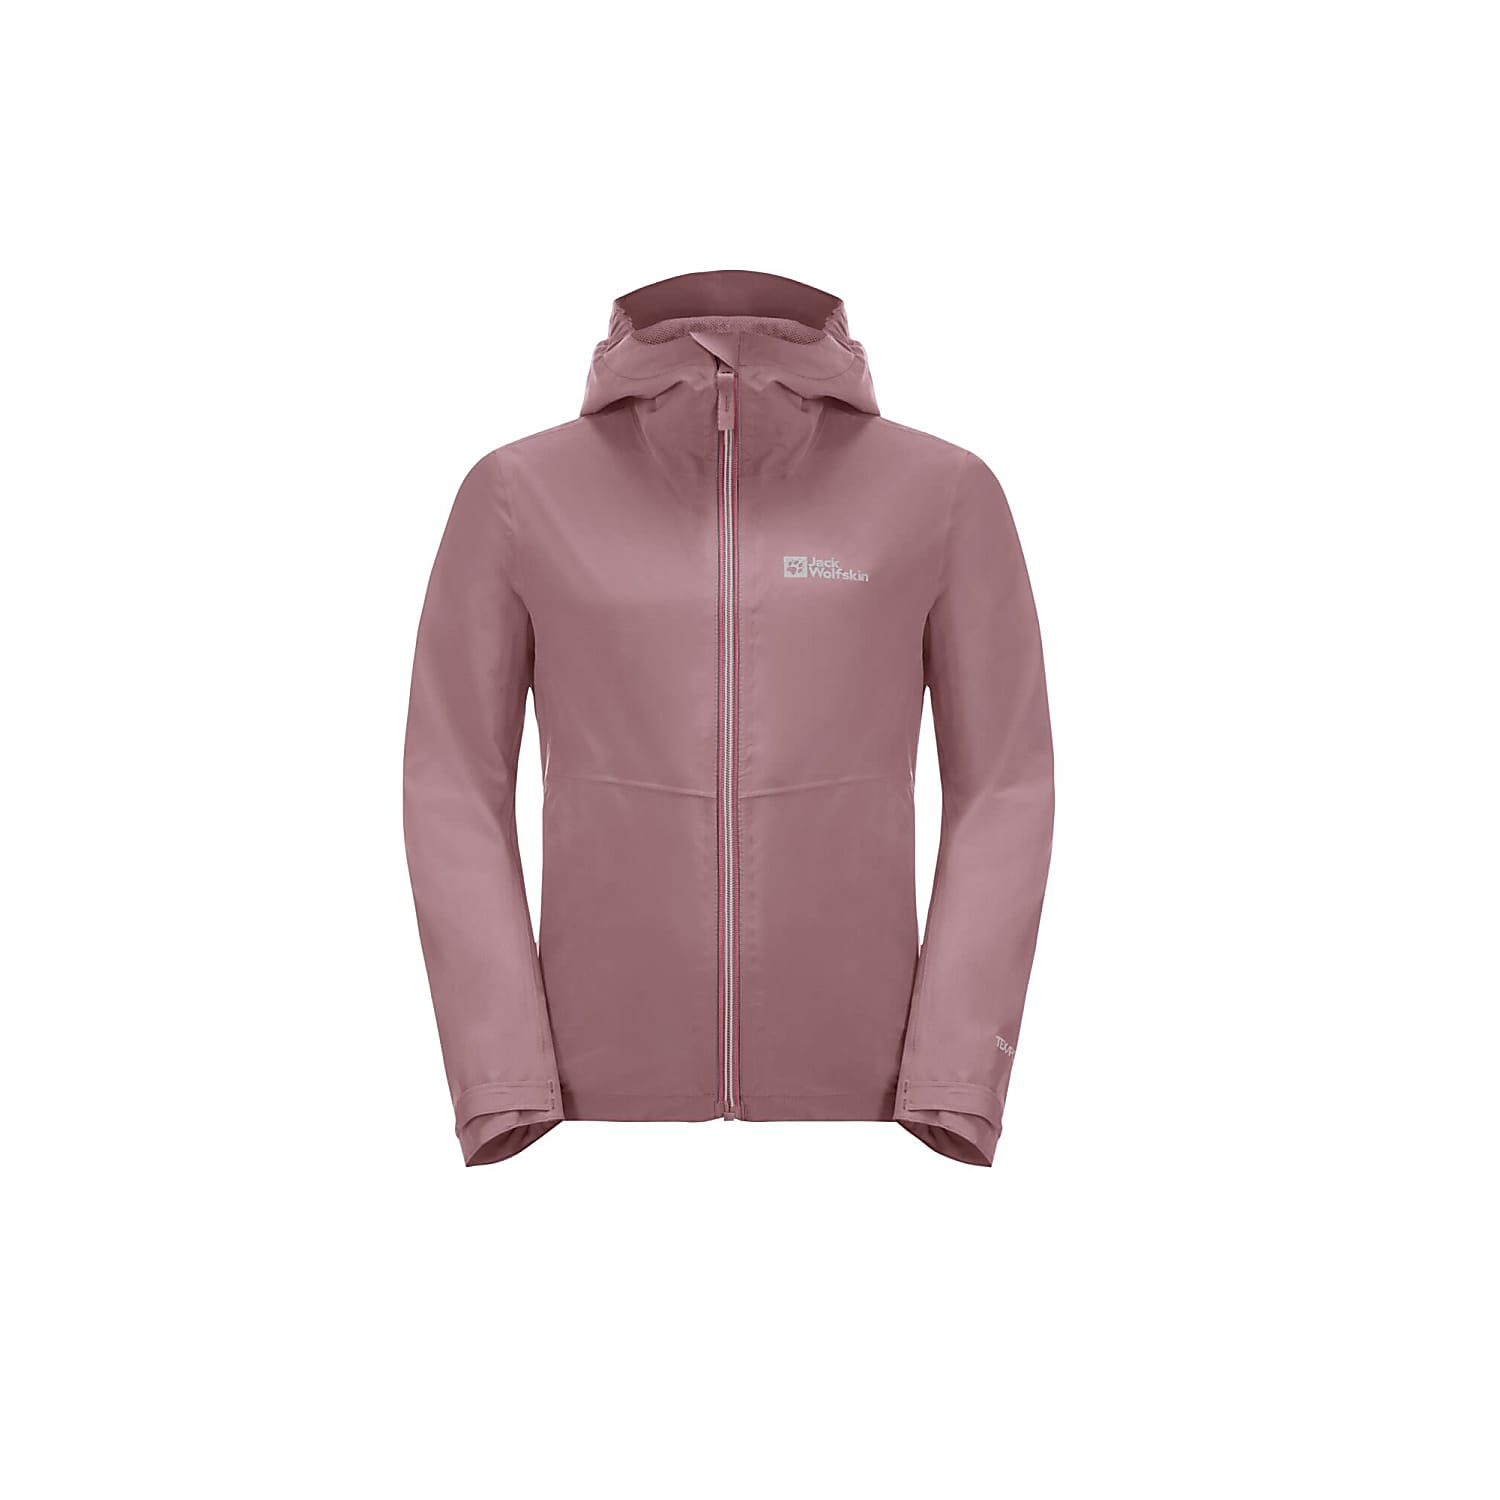 bod Specialiteit Een effectief Jack Wolfskin KIDS JWP SHELL, Ash Mauve - Fast and cheap shipping -  www.exxpozed.com